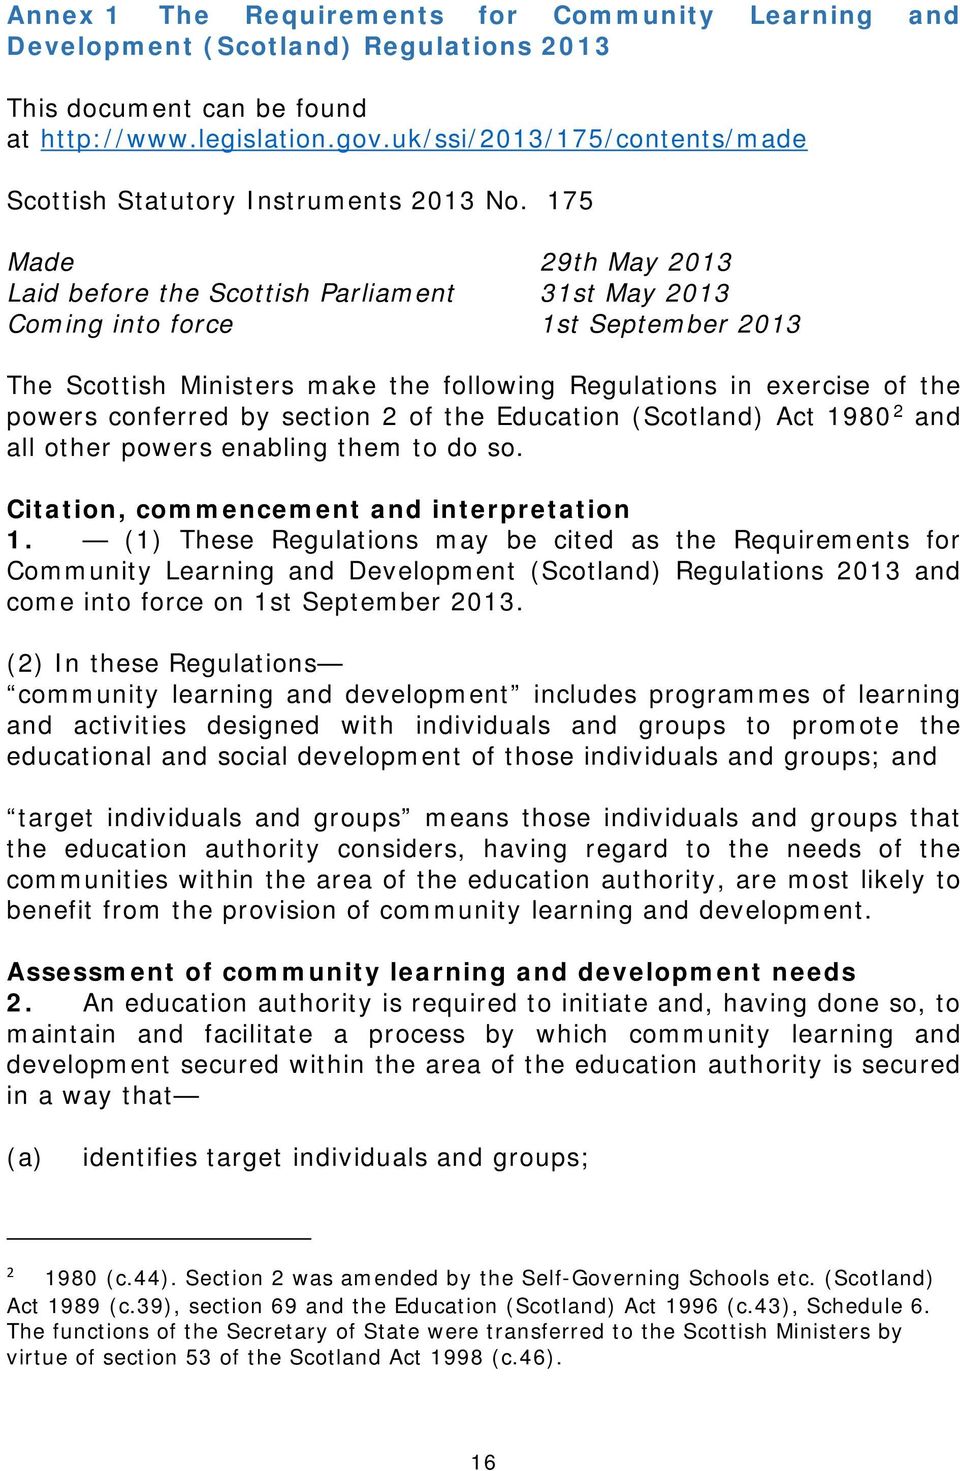 175 Made 29th May 2013 Laid before the Scottish Parliament 31st May 2013 Coming into force 1st September 2013 The Scottish Ministers make the following Regulations in exercise of the powers conferred